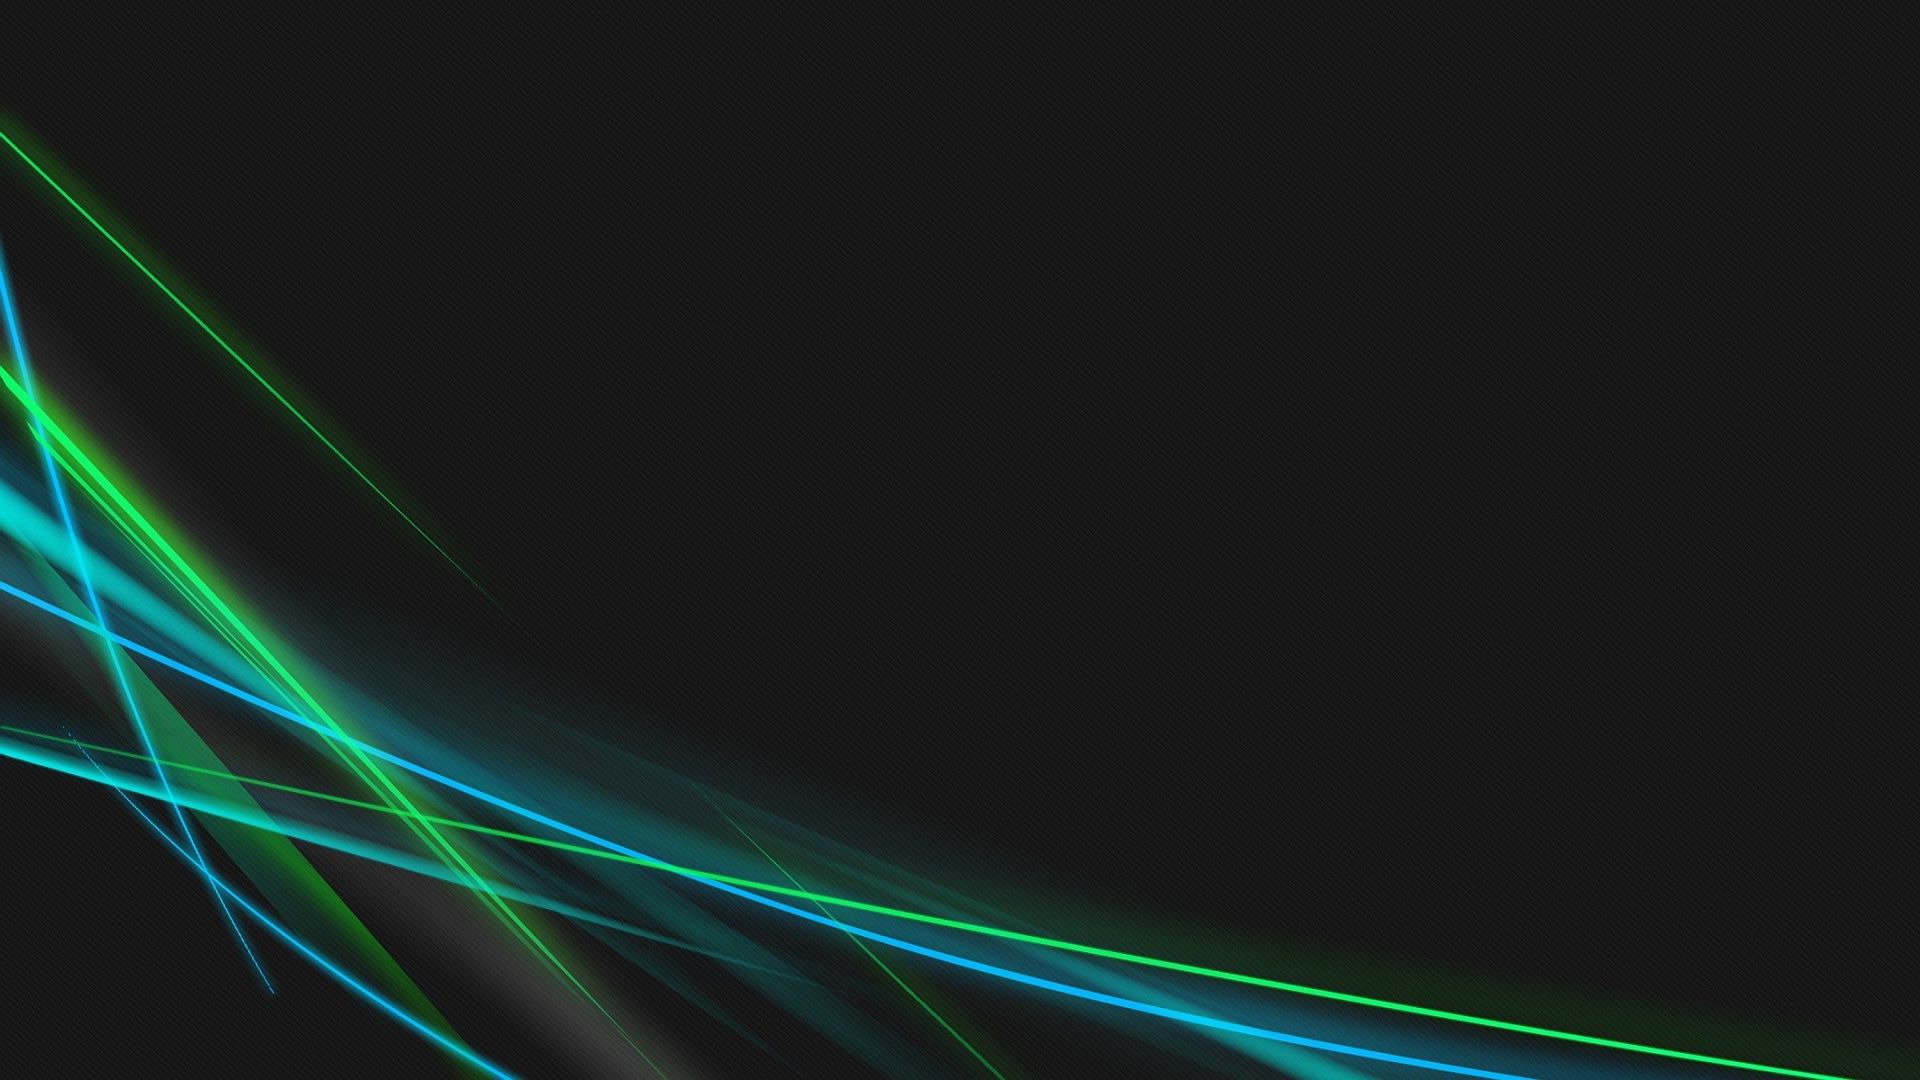 Blue and green neon curves wallpaper 6551